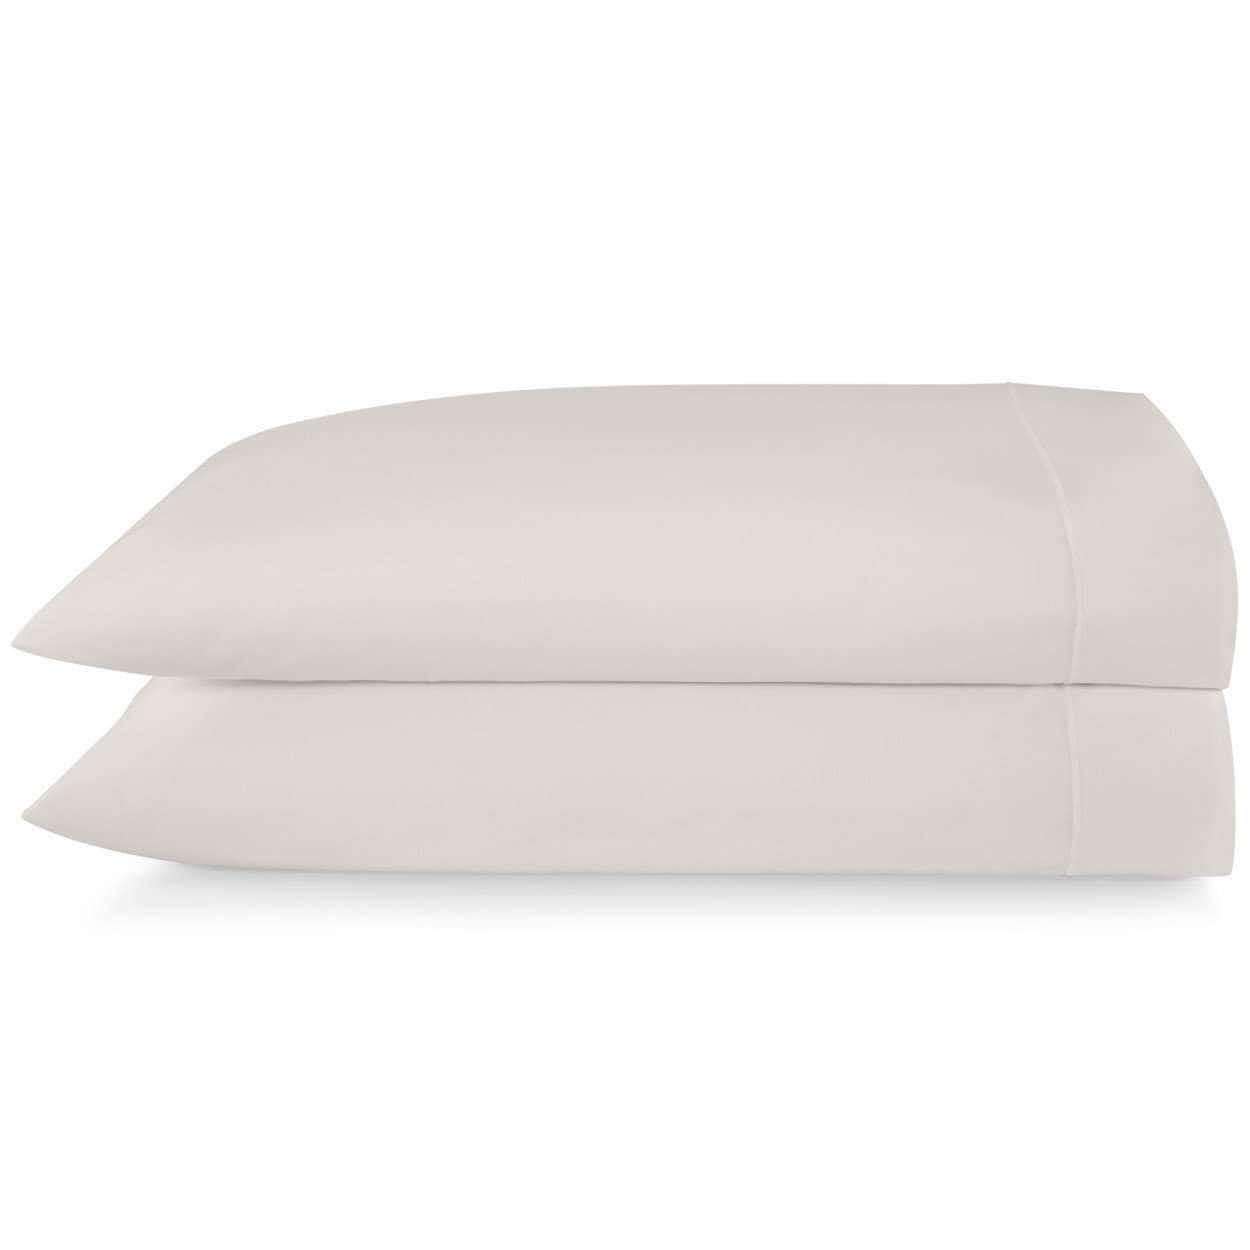 Sheets Soprano Pillowcase Pair by Peacock Alley Standard 20x30 / Platinum Peacock Alley